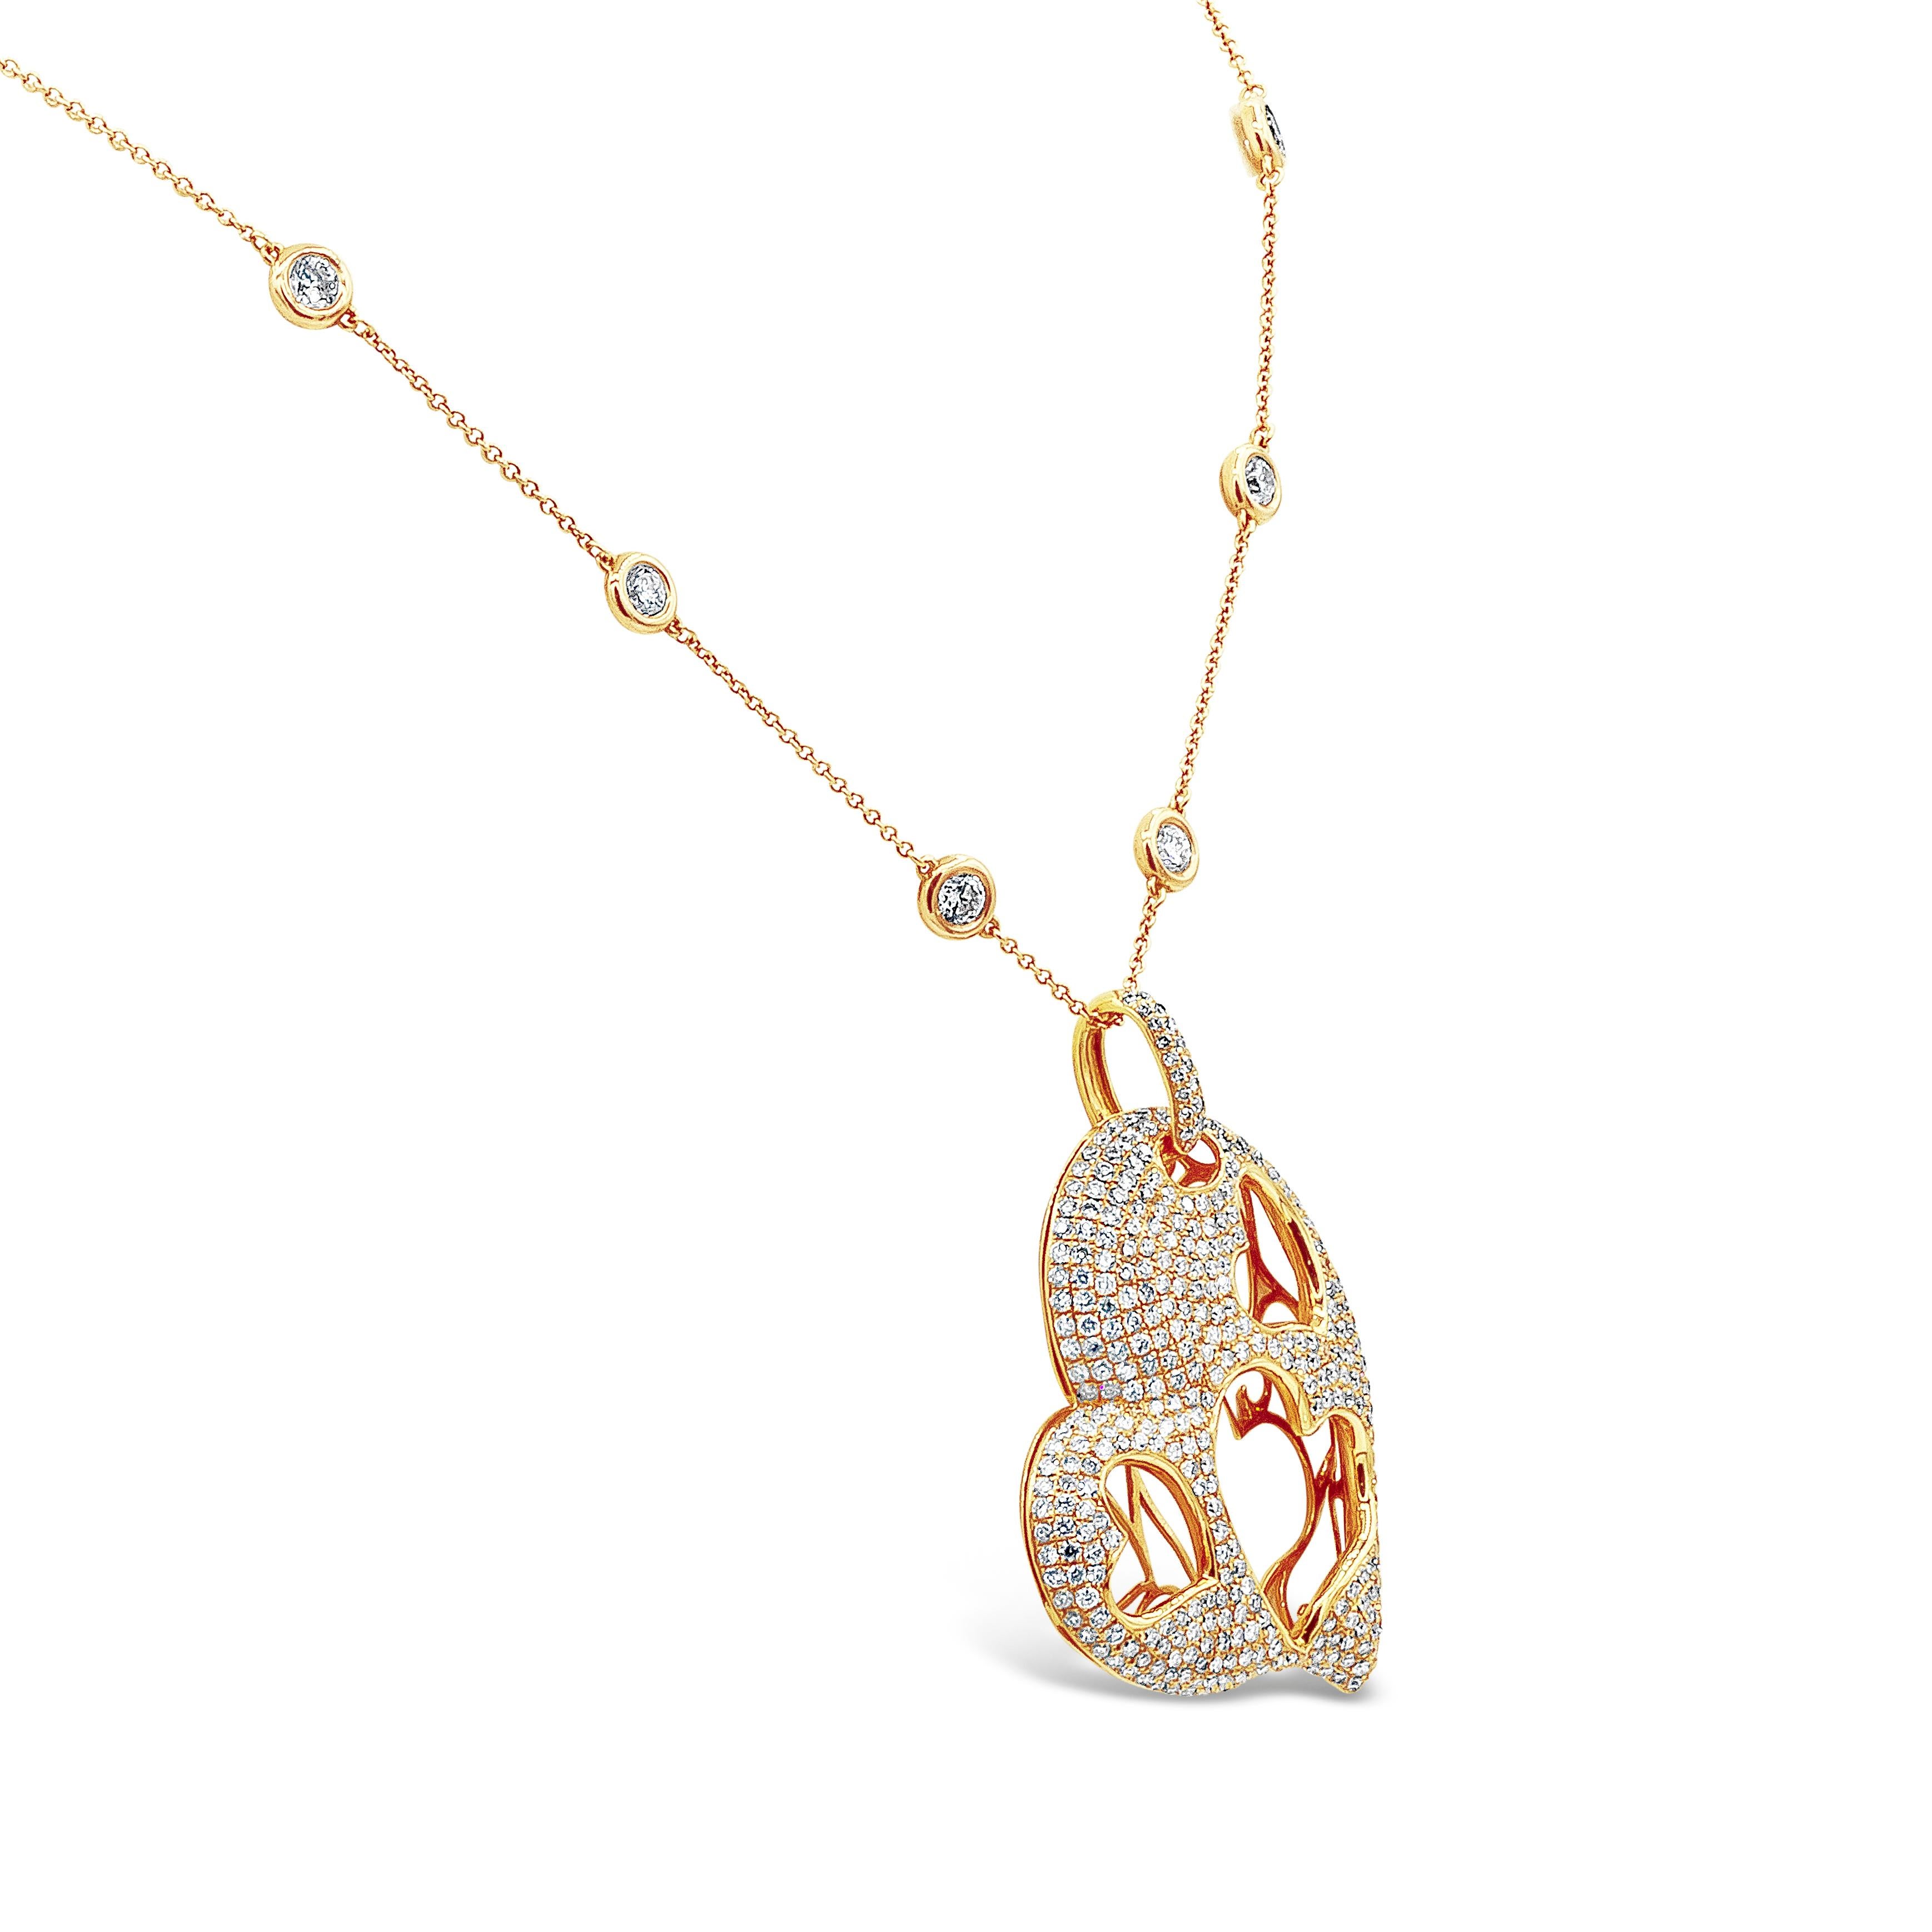 A fashionable necklace showcasing Lily & Co. Int. open-work heart shape pendant micro-pave set with 408 round brilliant diamonds weighing 5.08 carats total. Set in a diamonds by the yard 18 inches adjustable chain made in 18K rose gold. Diamond on